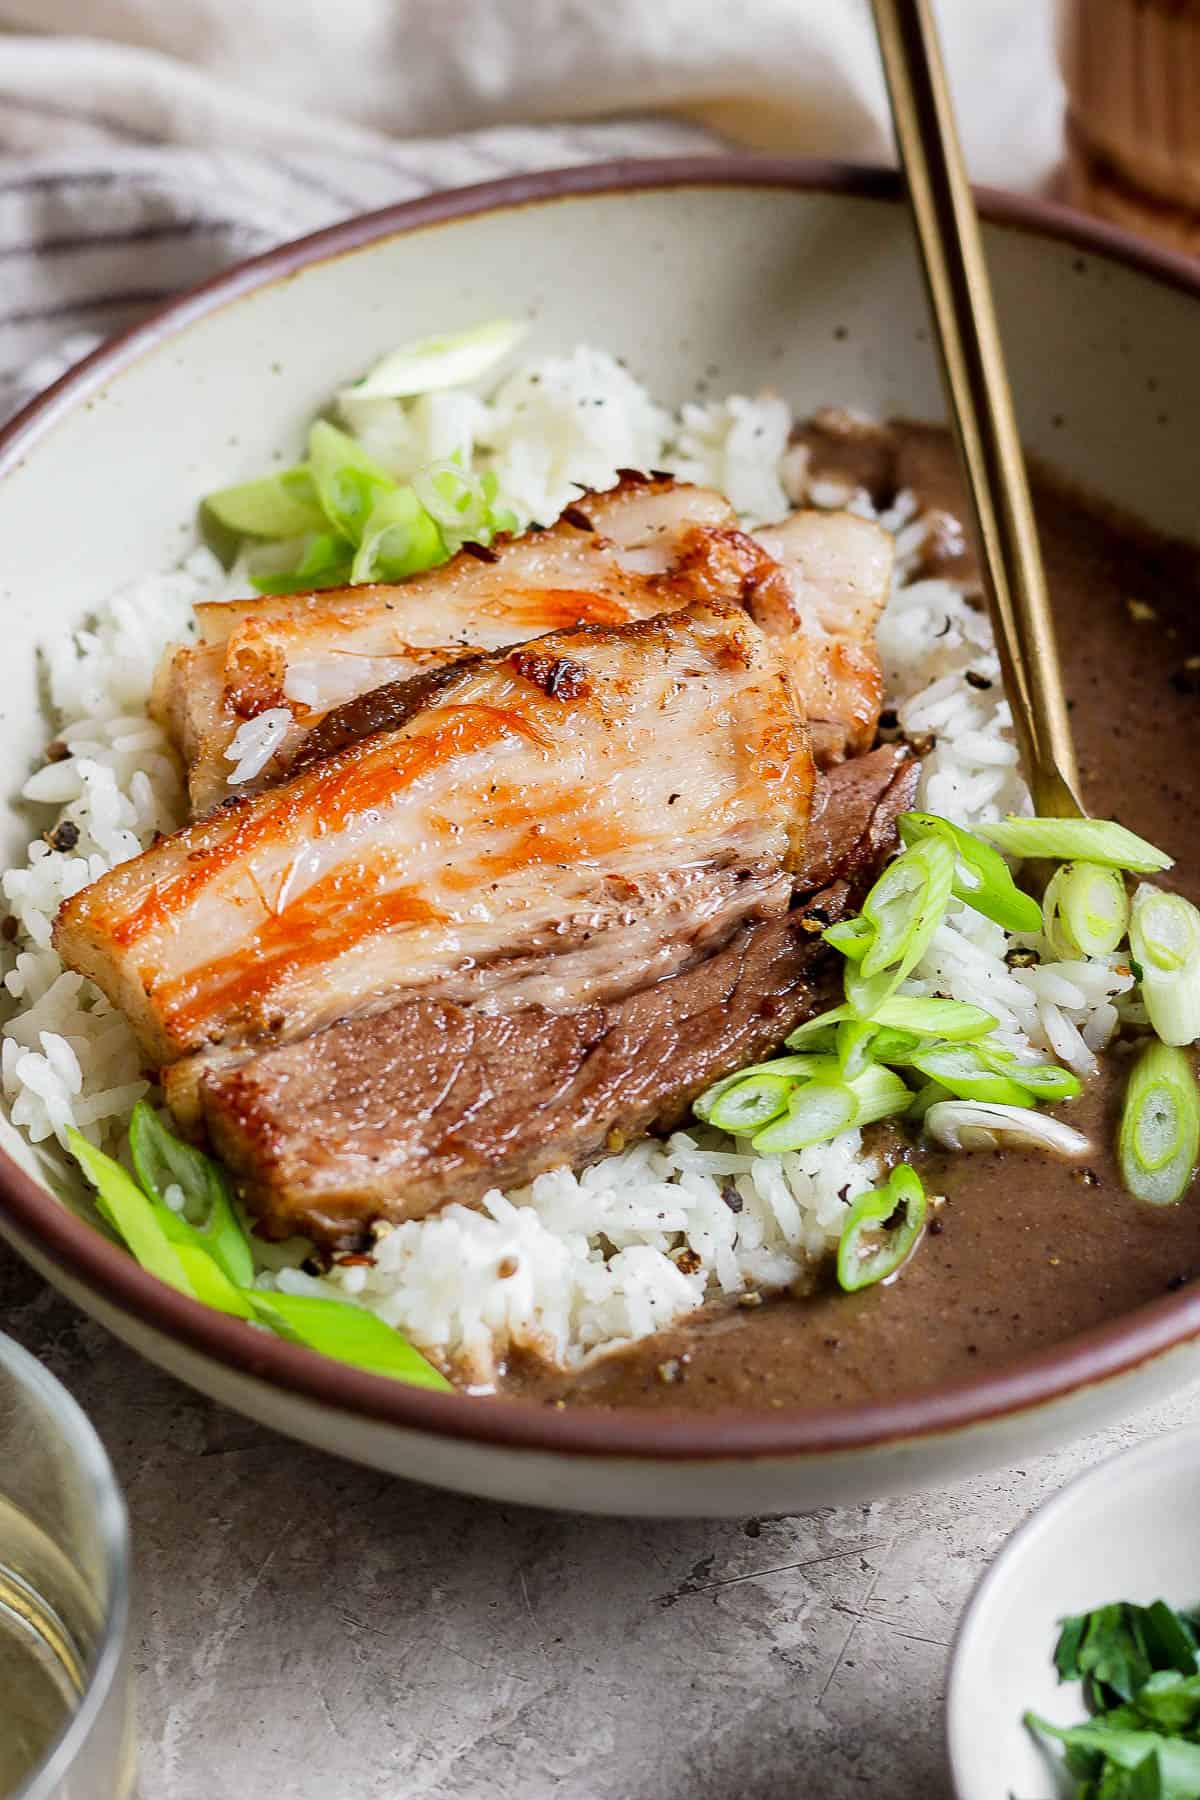 Braised pork belly and mole sauce in a rice bowl.